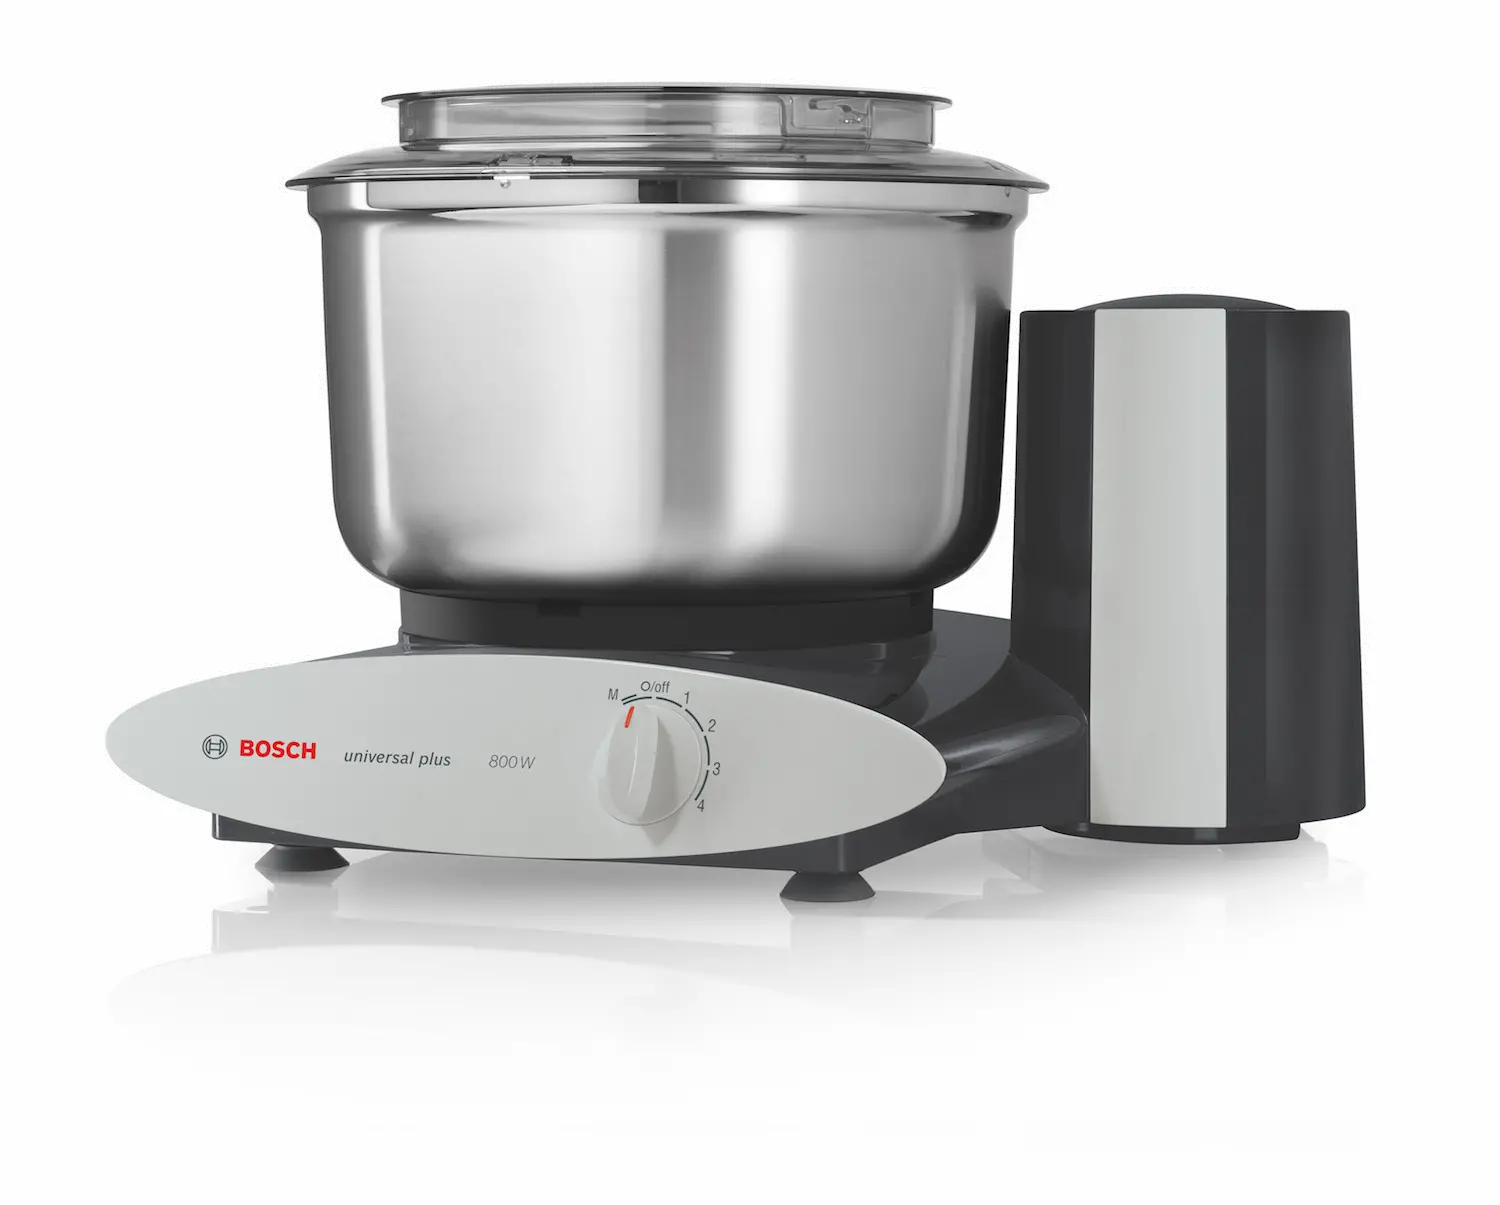 https://static.rcwilley.com/products/111751209/Bosch-Universal-Plus-Mixer---Black-rcwilley-image1.webp